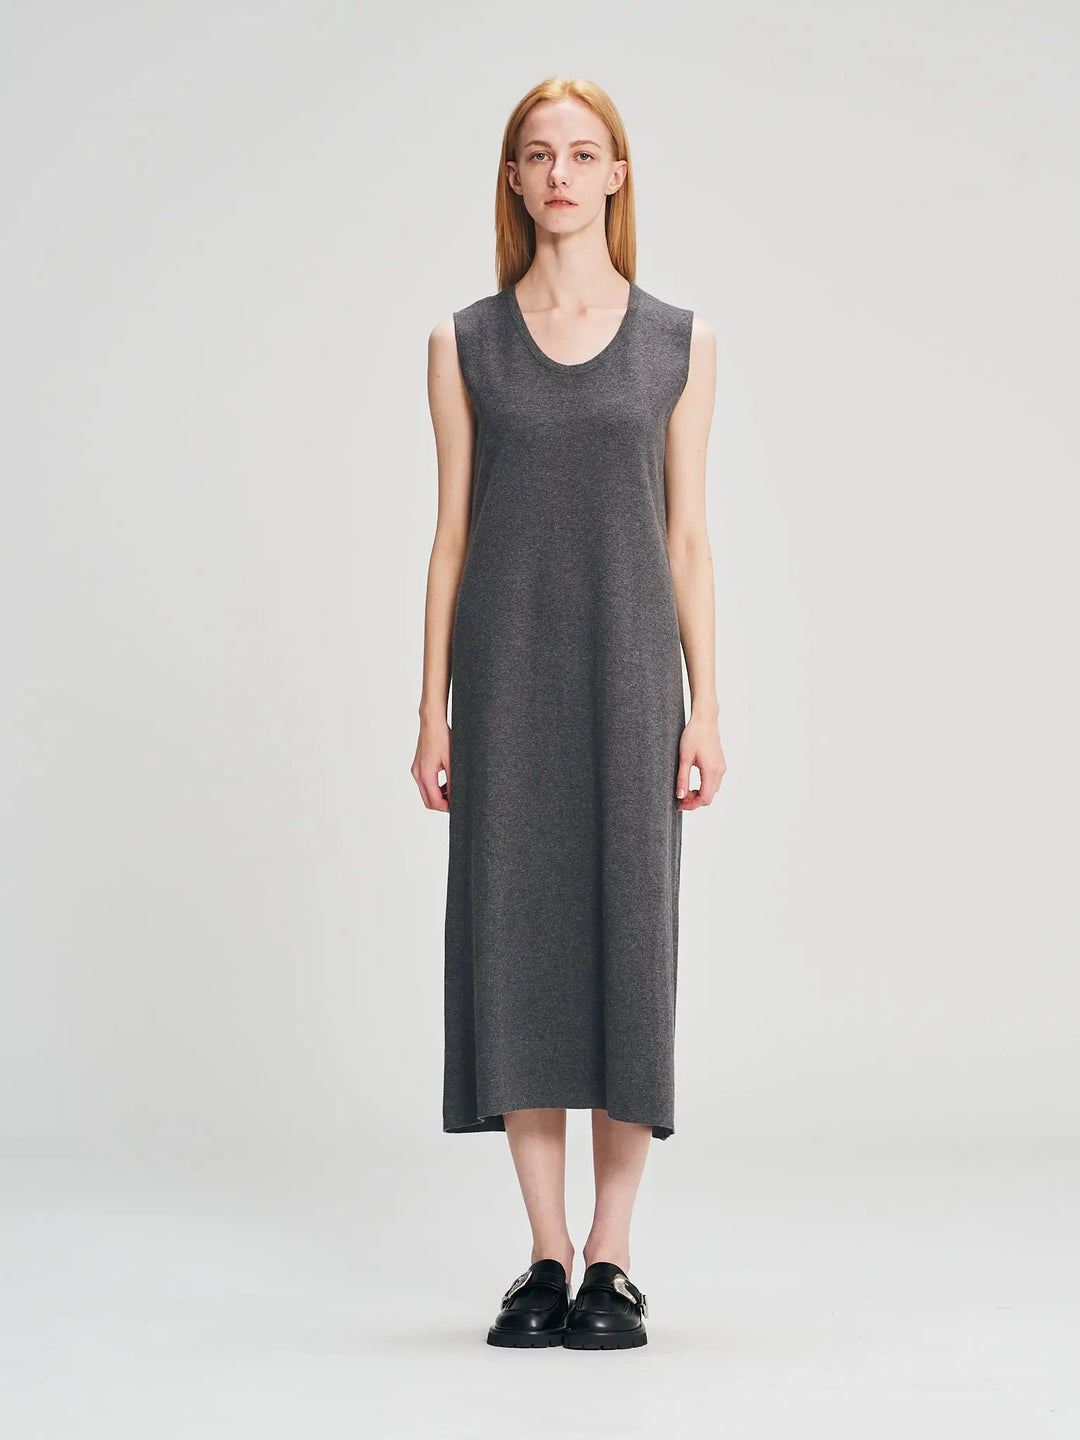 An image of a  Grey-One-Size T3075 Long Shift Dress by  Mirra Masa